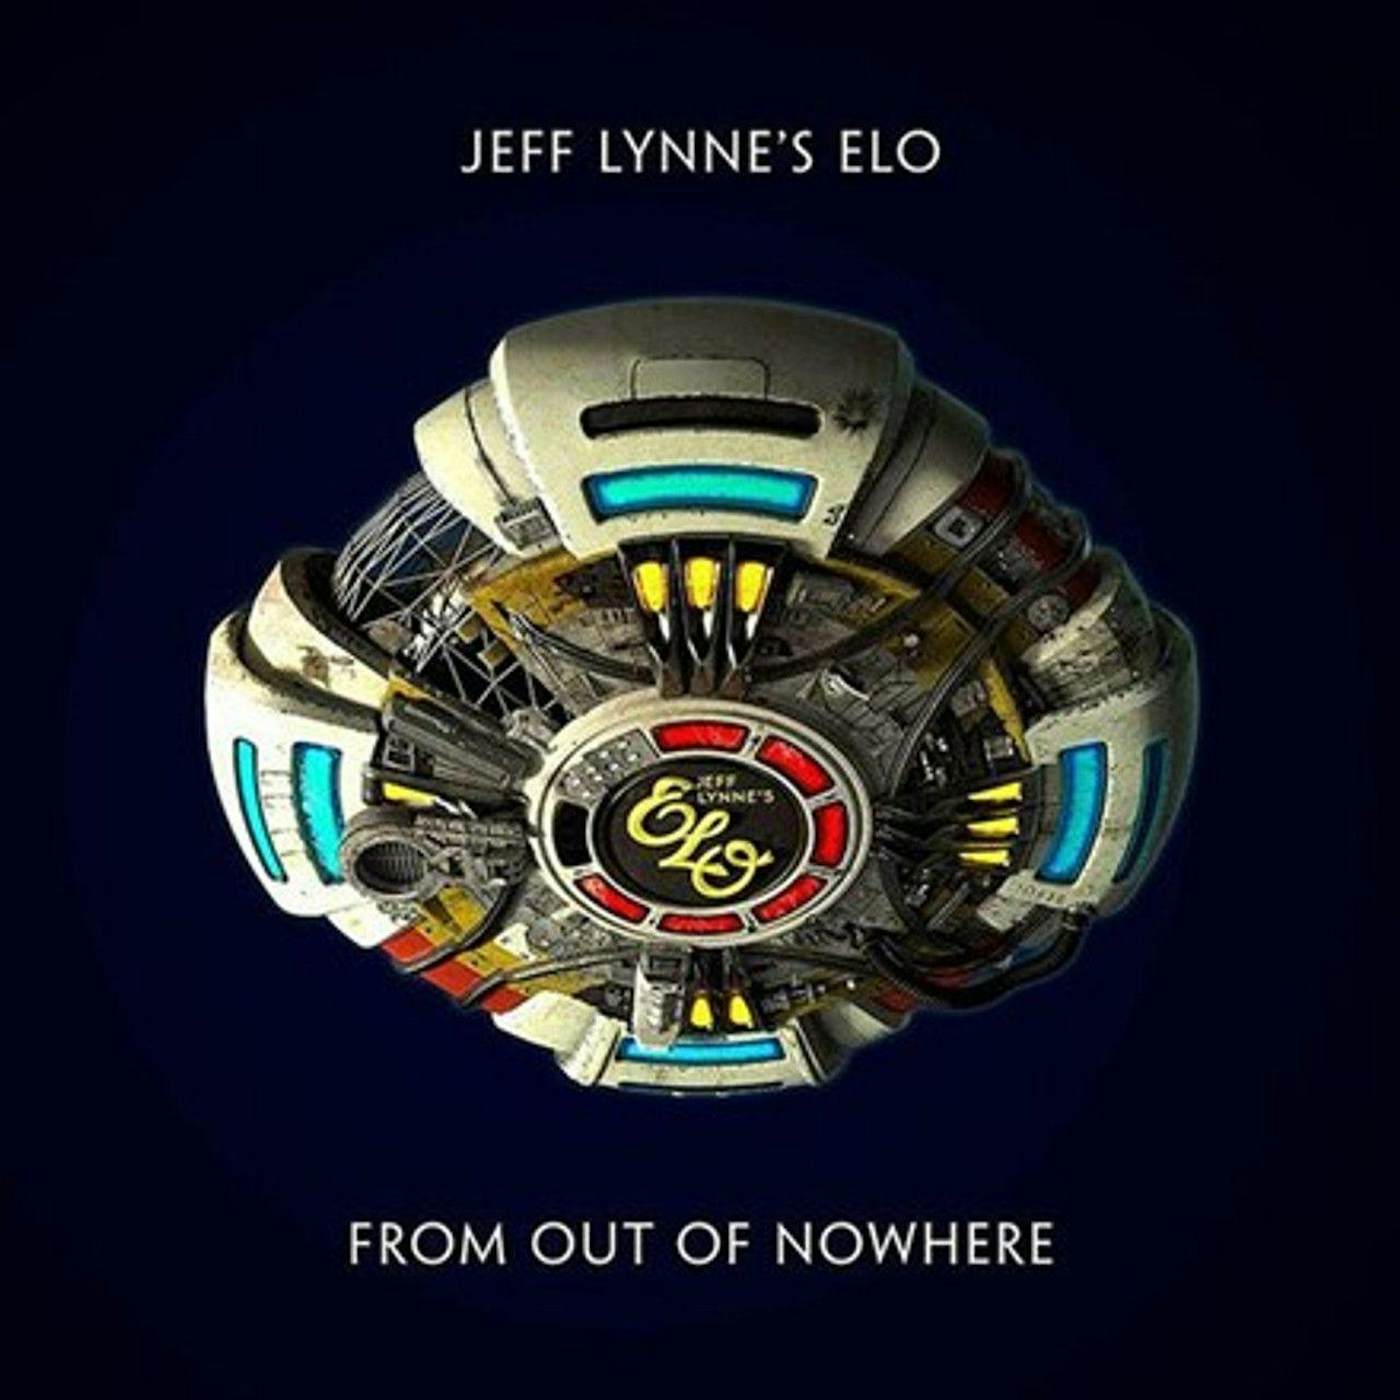 ELO (Electric Light Orchestra) From Out Of Nowhere Vinyl Record